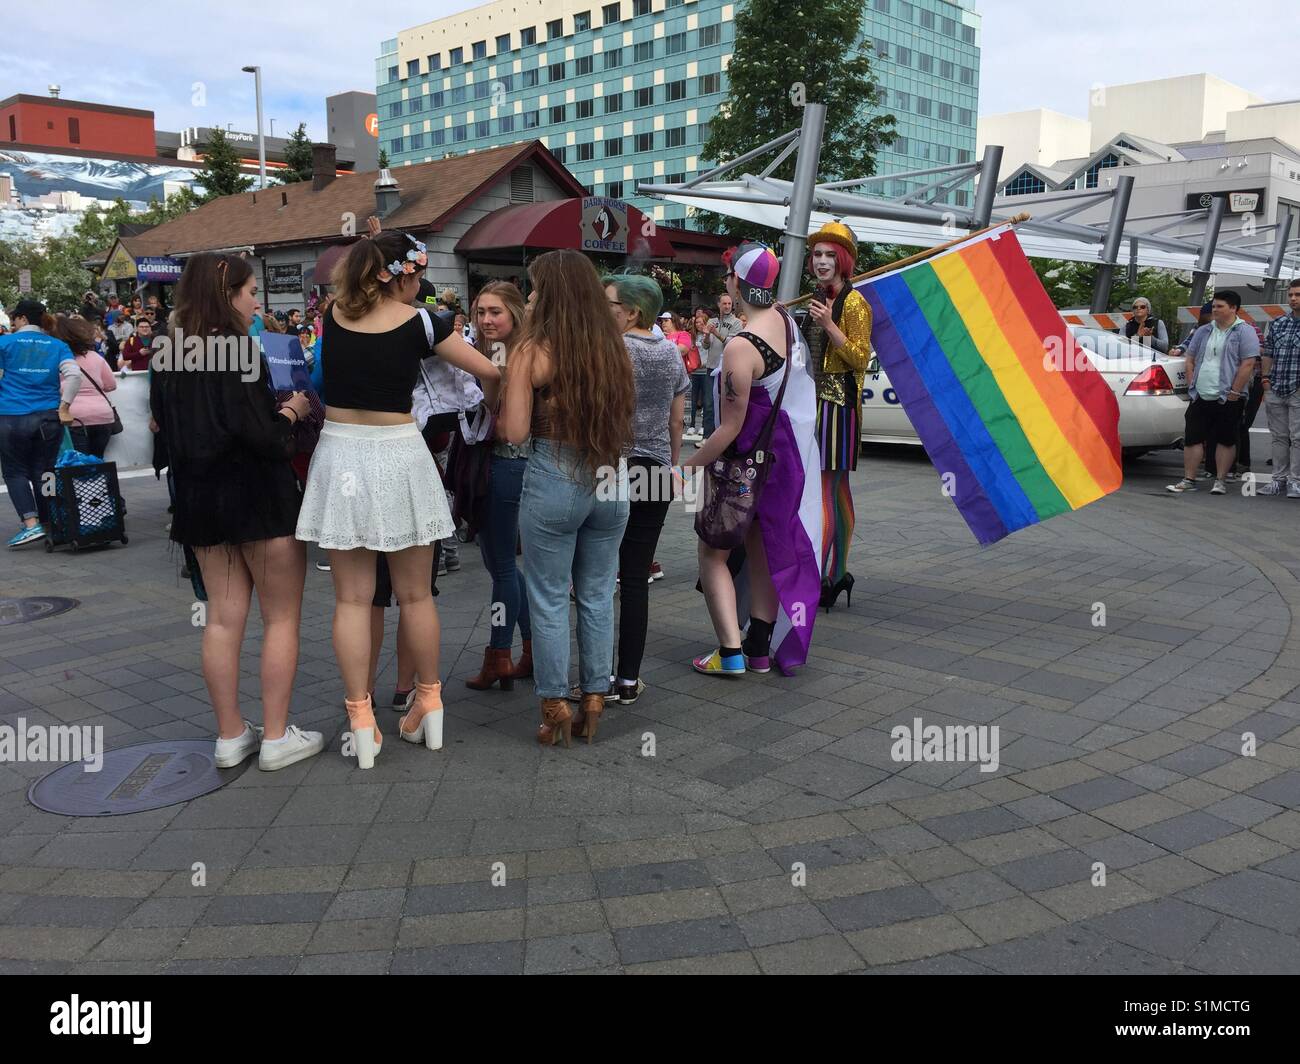 Teenagers out and proud celebrating diversity at the gay pride march in Anchorage, Alaska, United States Stock Photo